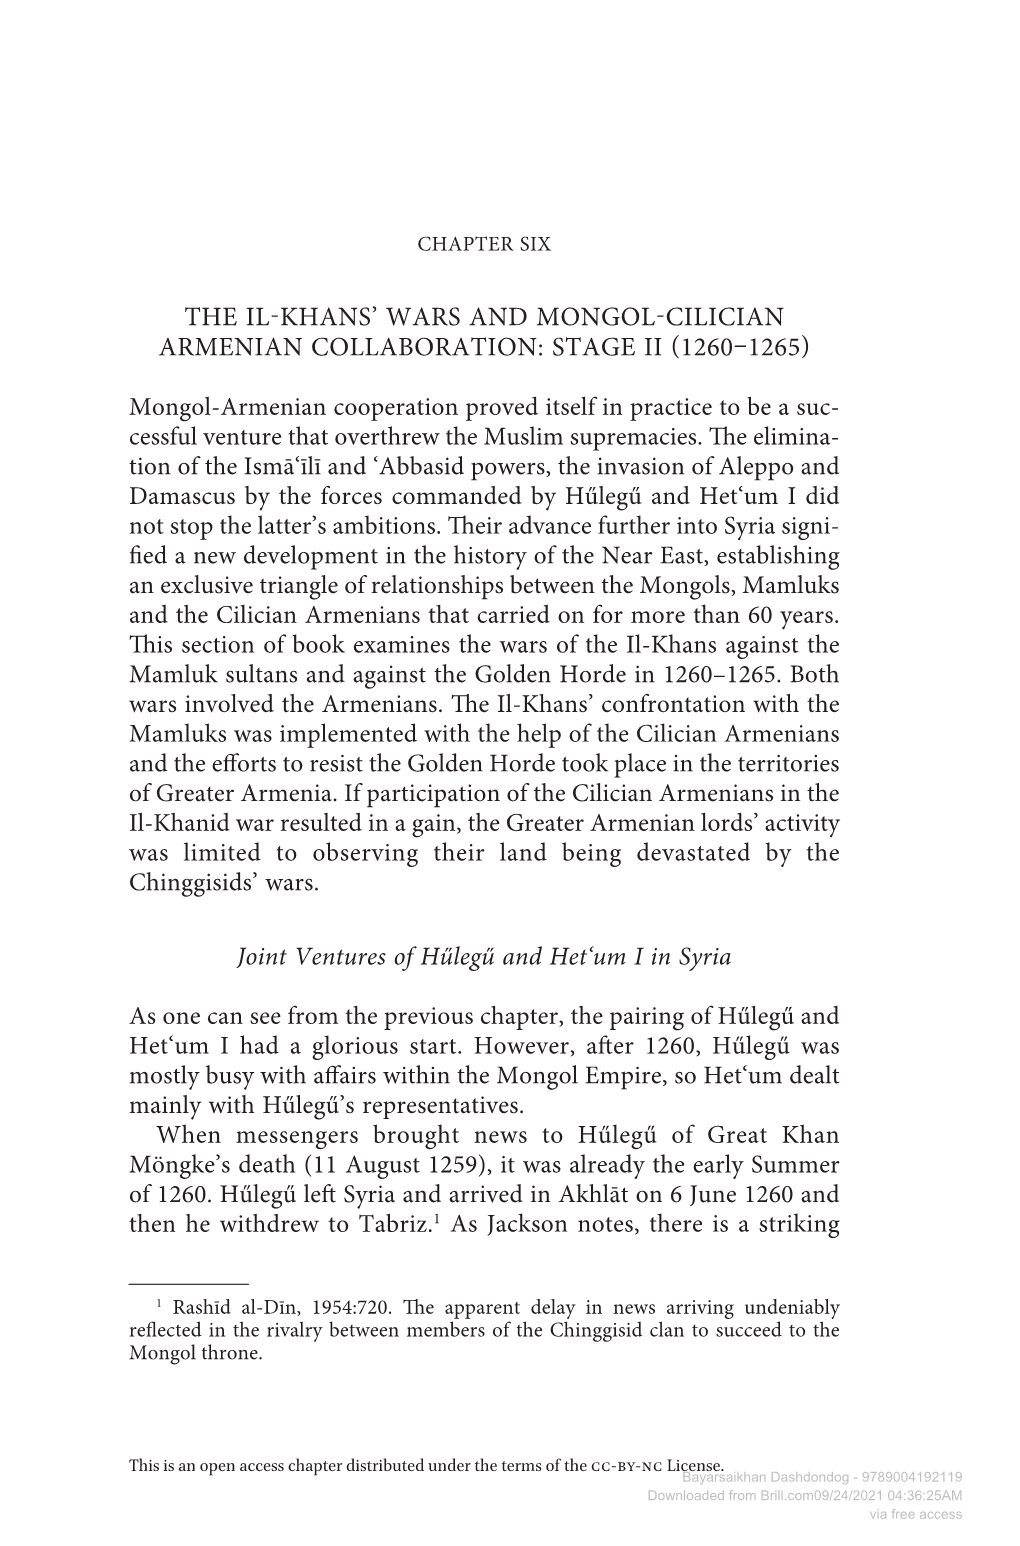 The Il Khans' Wars and Mongol Cilician